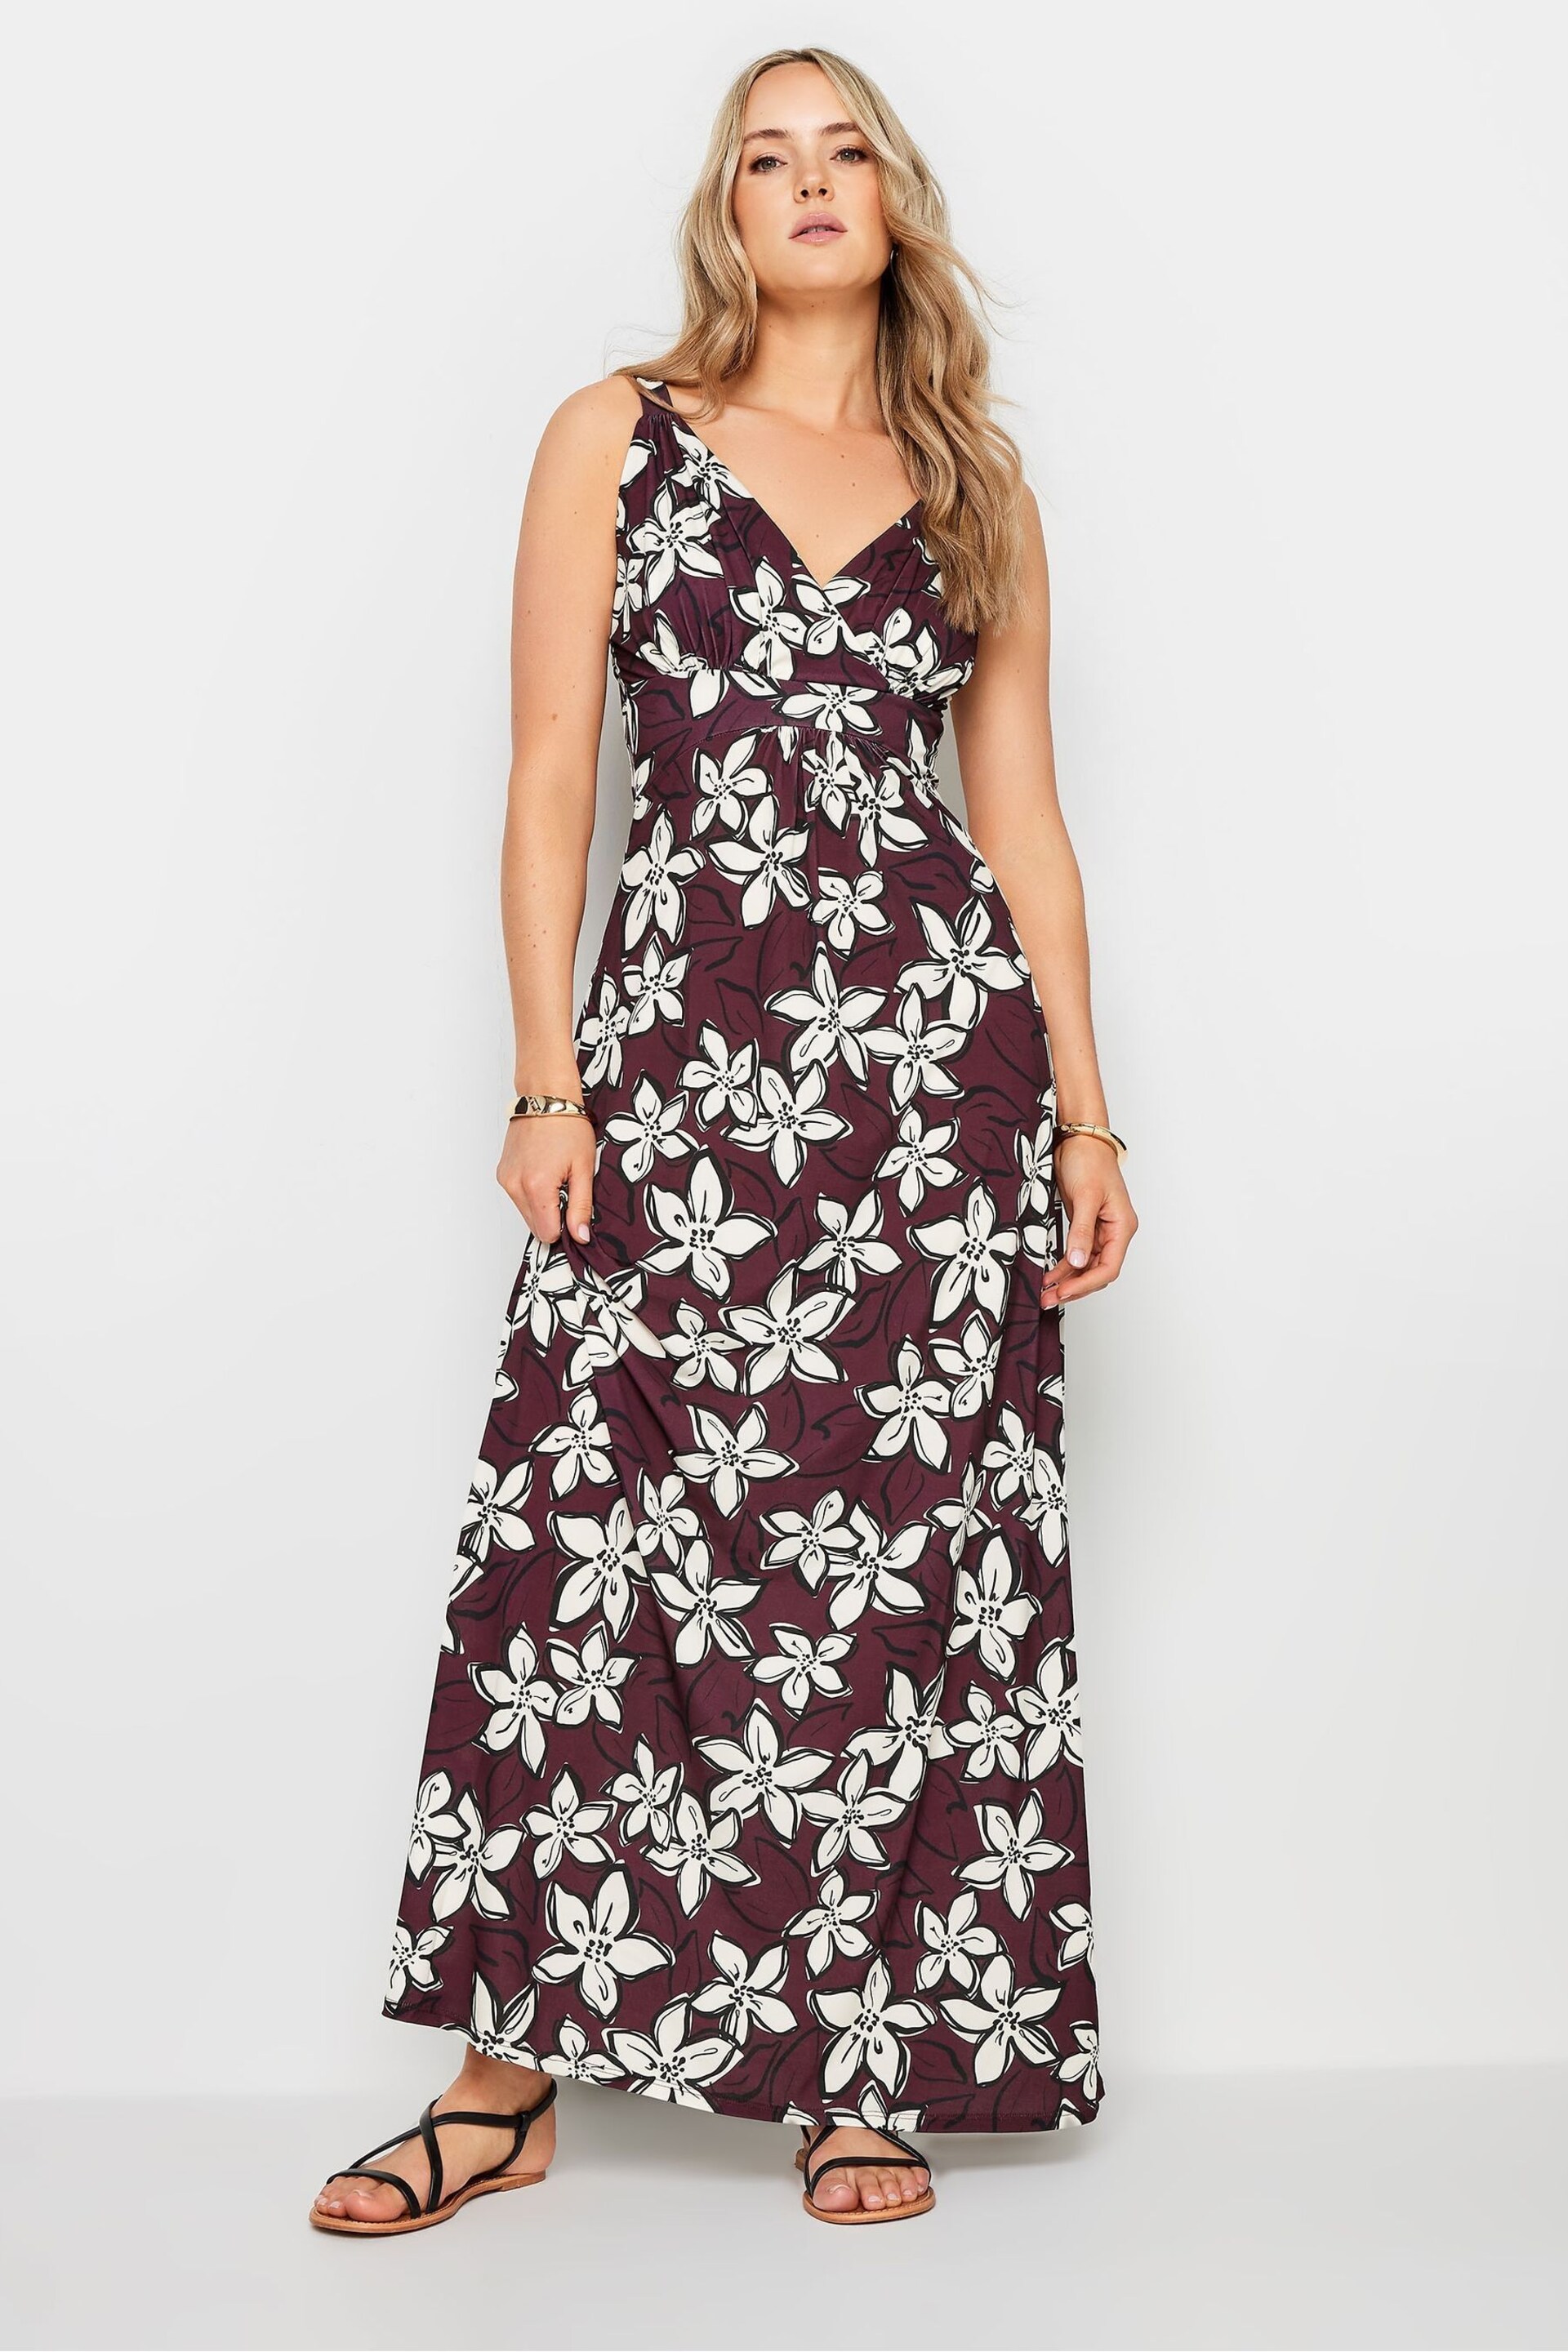 Long Tall Sally Red LTS Tall Wine Red Floral Print Maxi Dress - Image 1 of 5